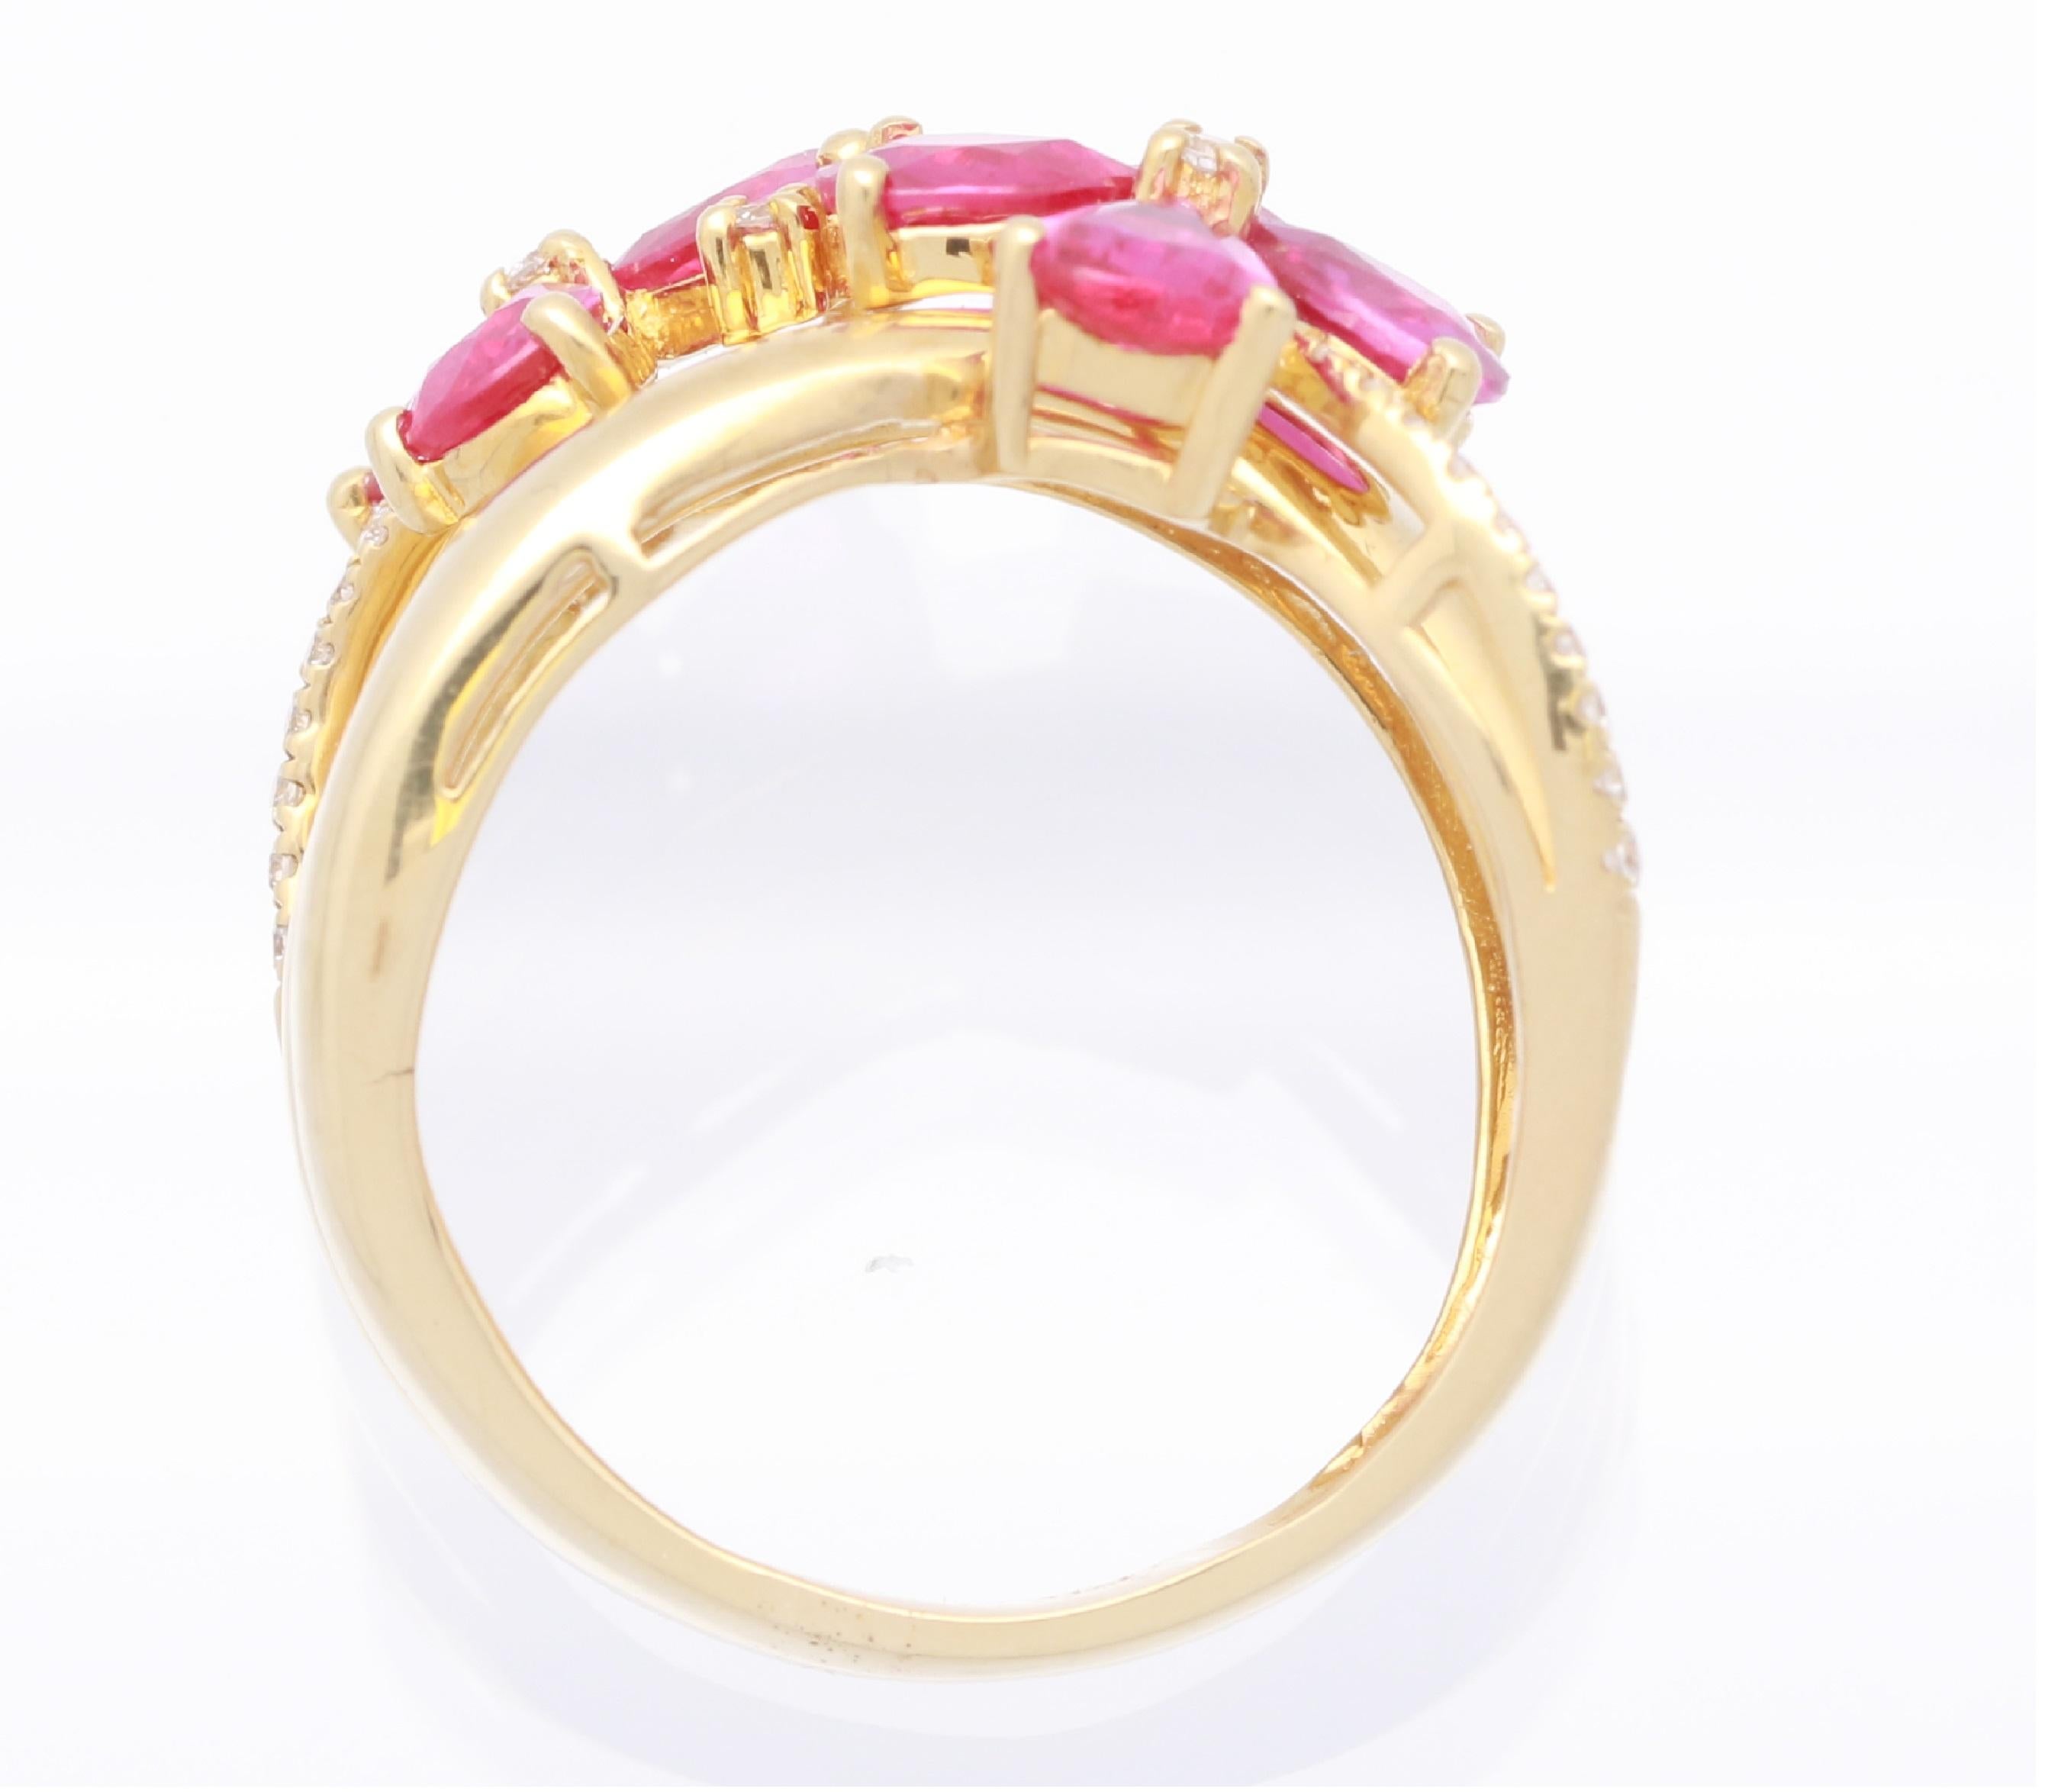 This one of a kind floral cocktail Ring is crafted in 18-karat Yellow gold and features 7 Rubies with 2 1/3 carats & 23 Round Diamonds 1/9 Ct. in a prong-setting. This ring comes in Size 7 is a perfect gift either for yourself or someone you love.